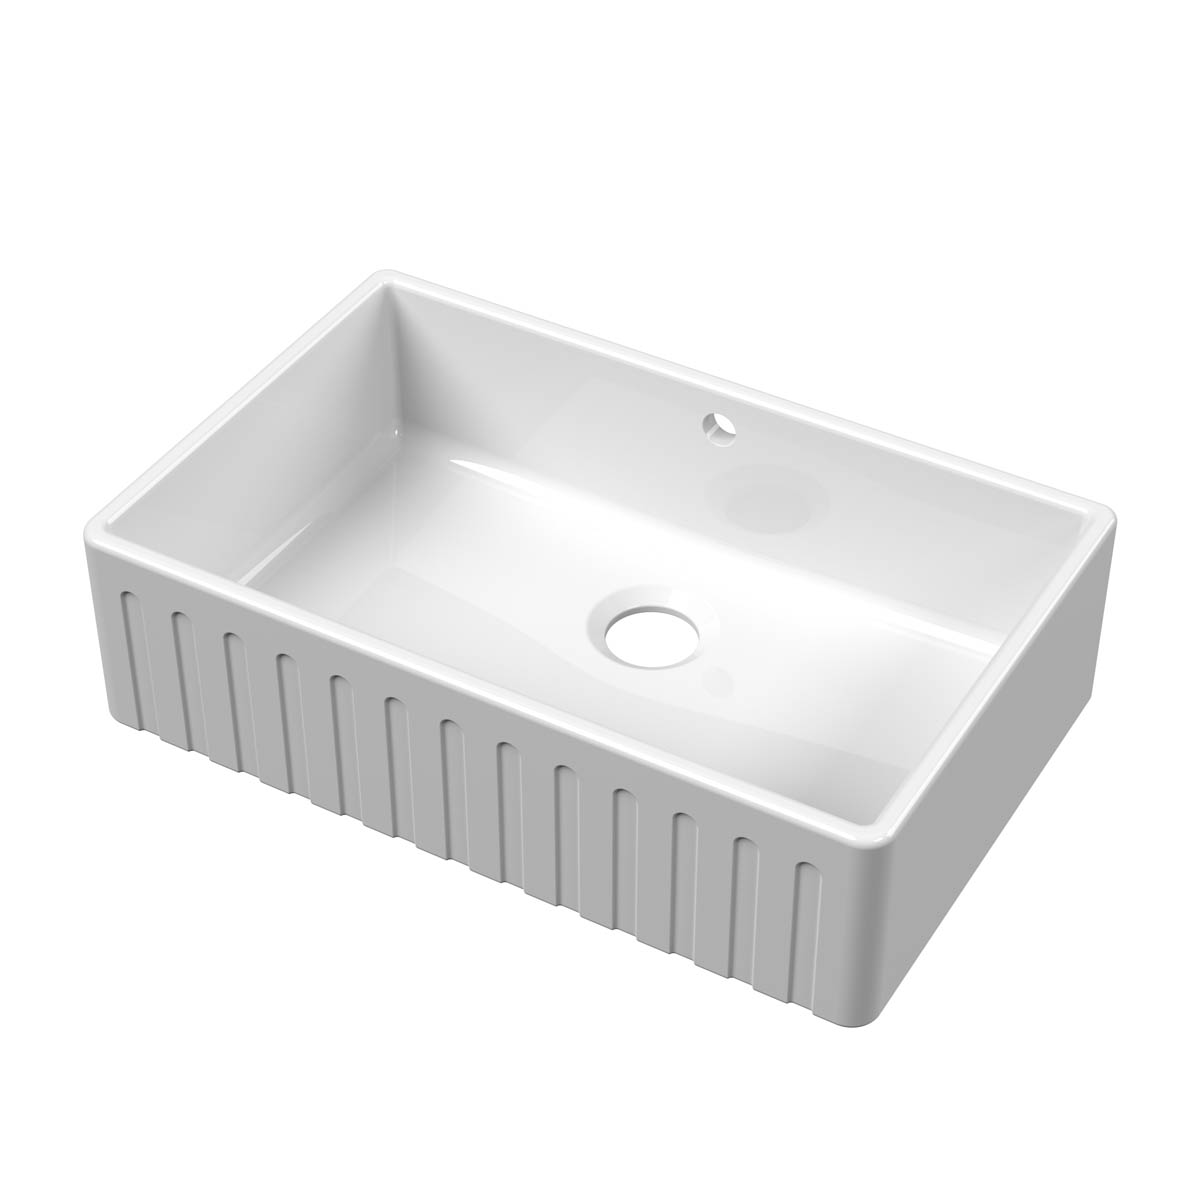 Nuie Fluted Butler 795x500x220mm Fireclay Sink with Central Waste & Overflow - White (20289)